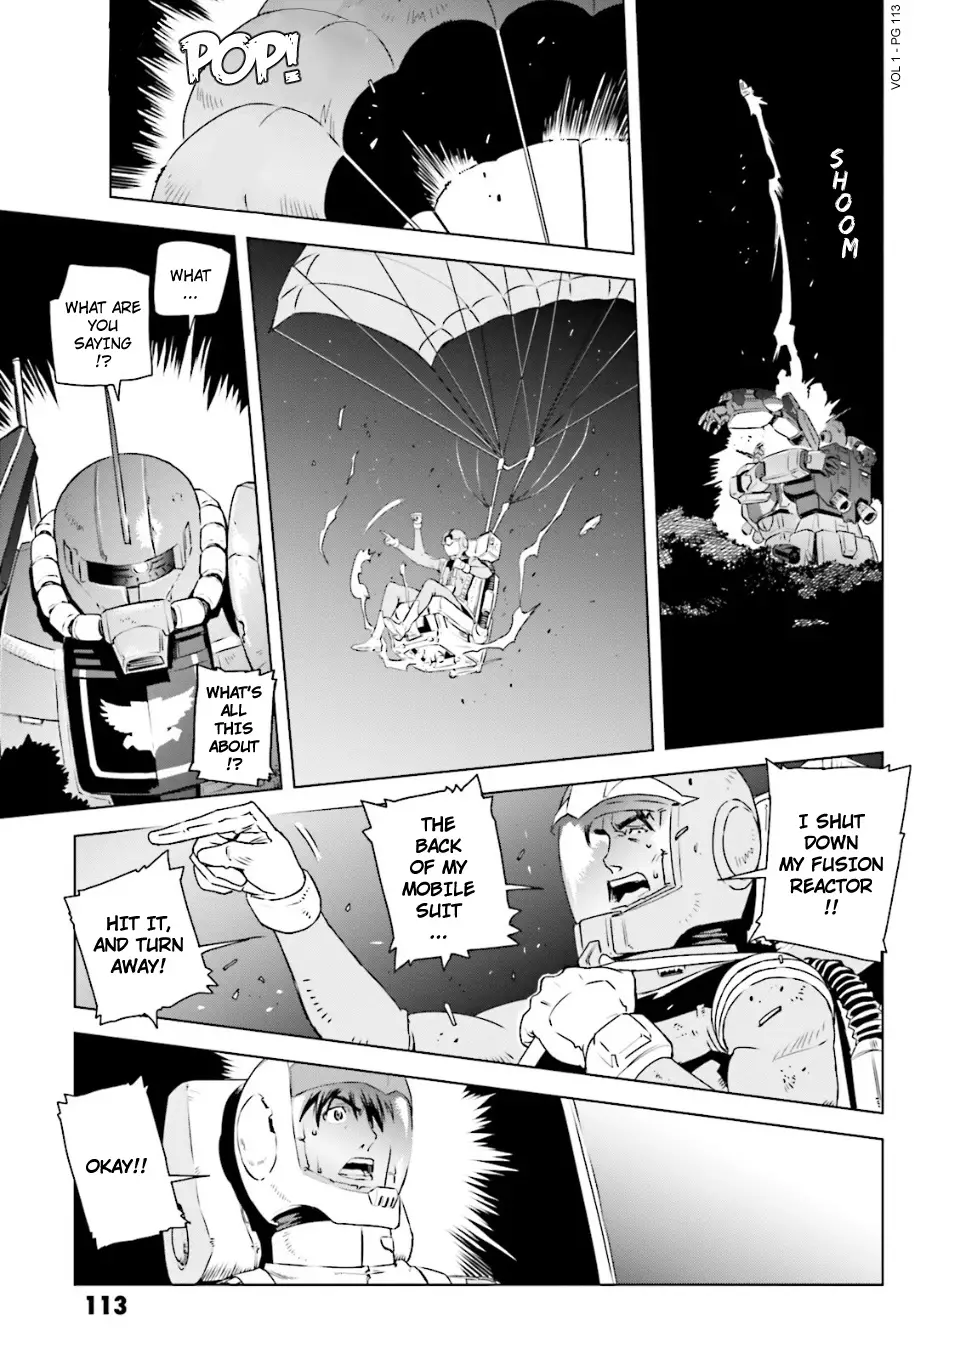 Mobile Suit Gundam Side Story - Missing Link - 4 page 21-8e8ff3fe